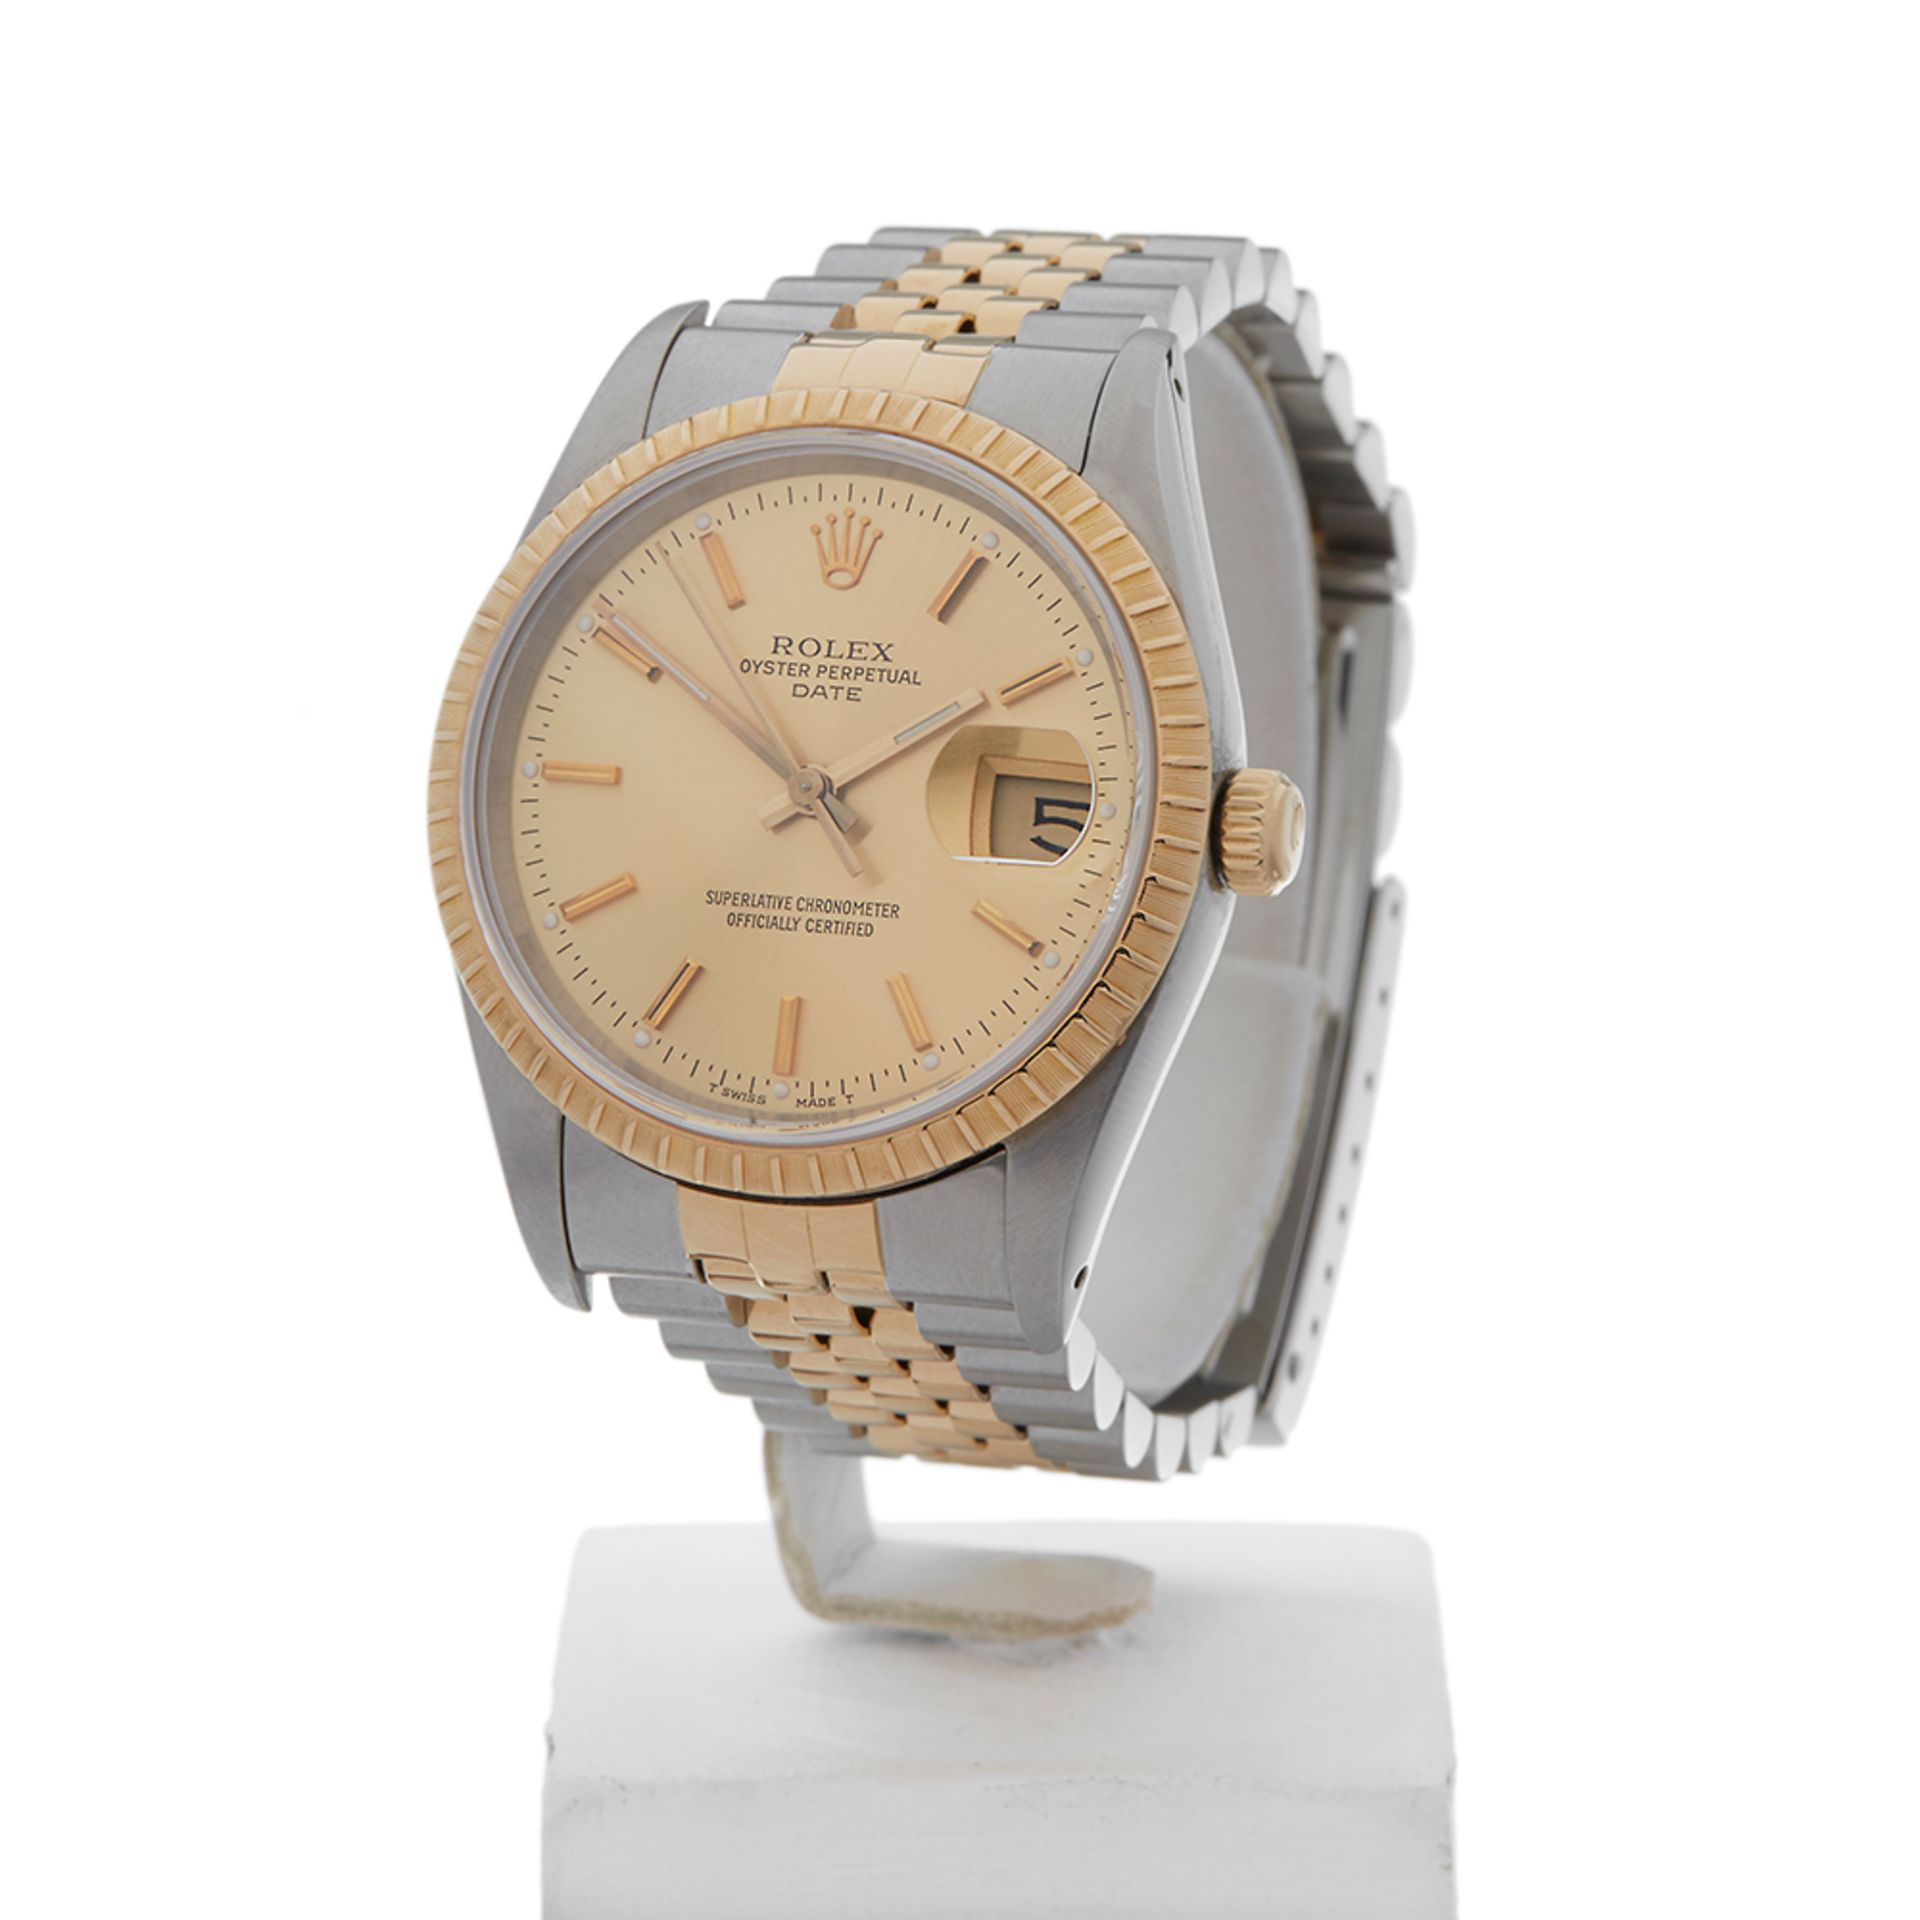 Oyster Perpetual Date 36mm Stainless Steel & 18k Yellow Gold - 15233